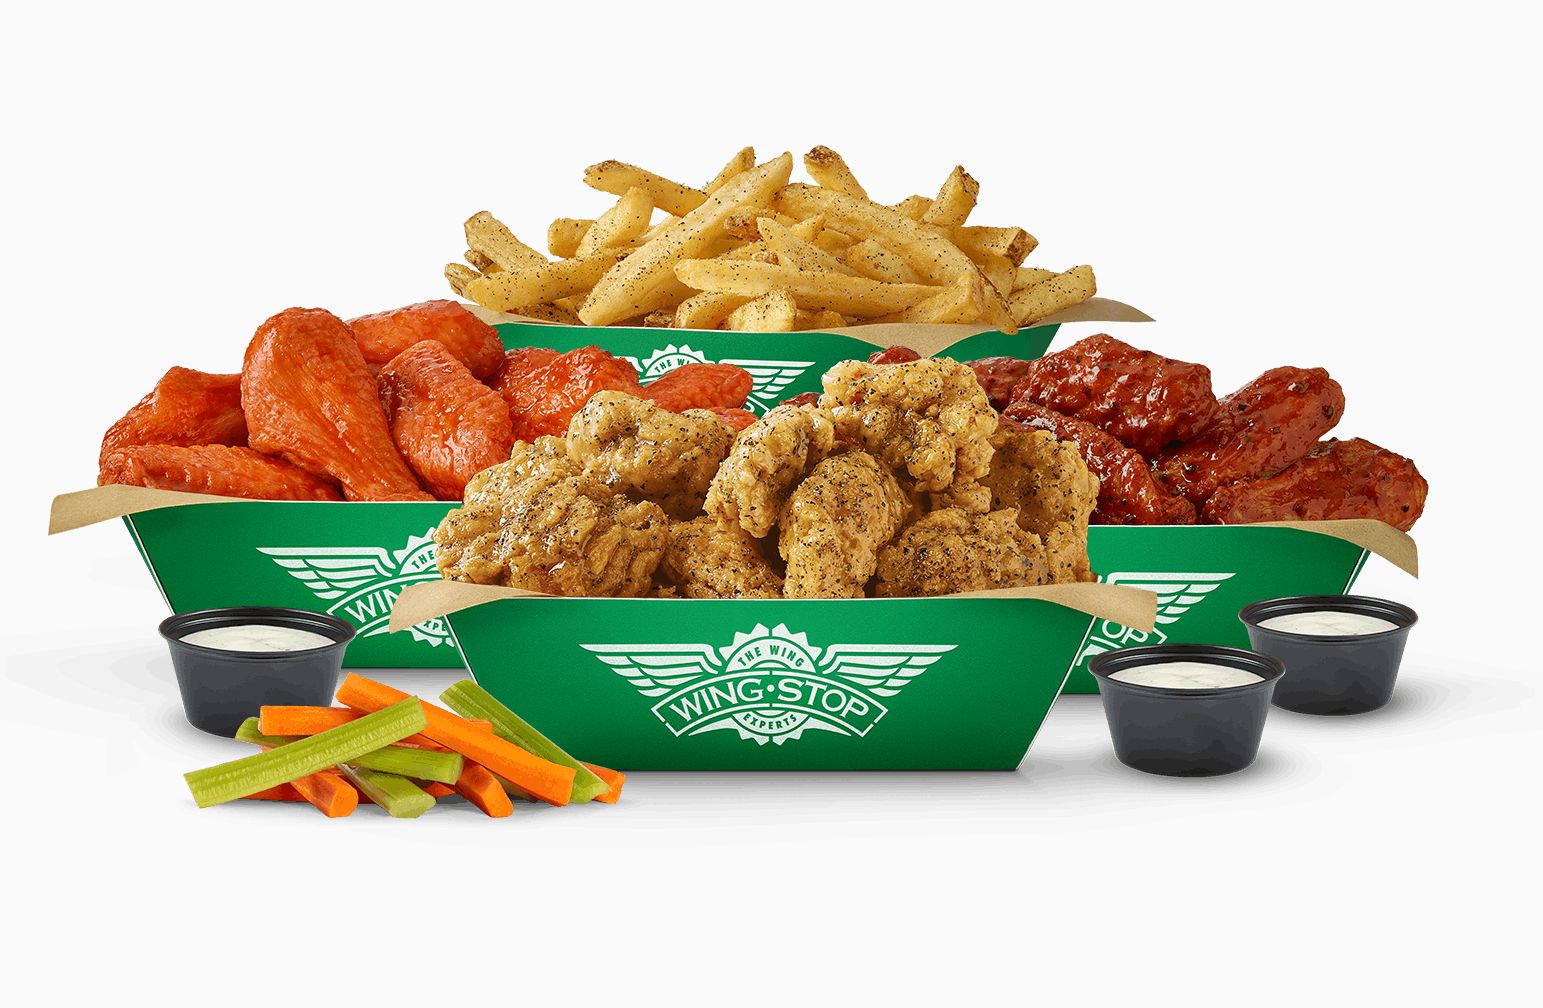 30 Crew Pack Available at Participating Wingstop Restaurants